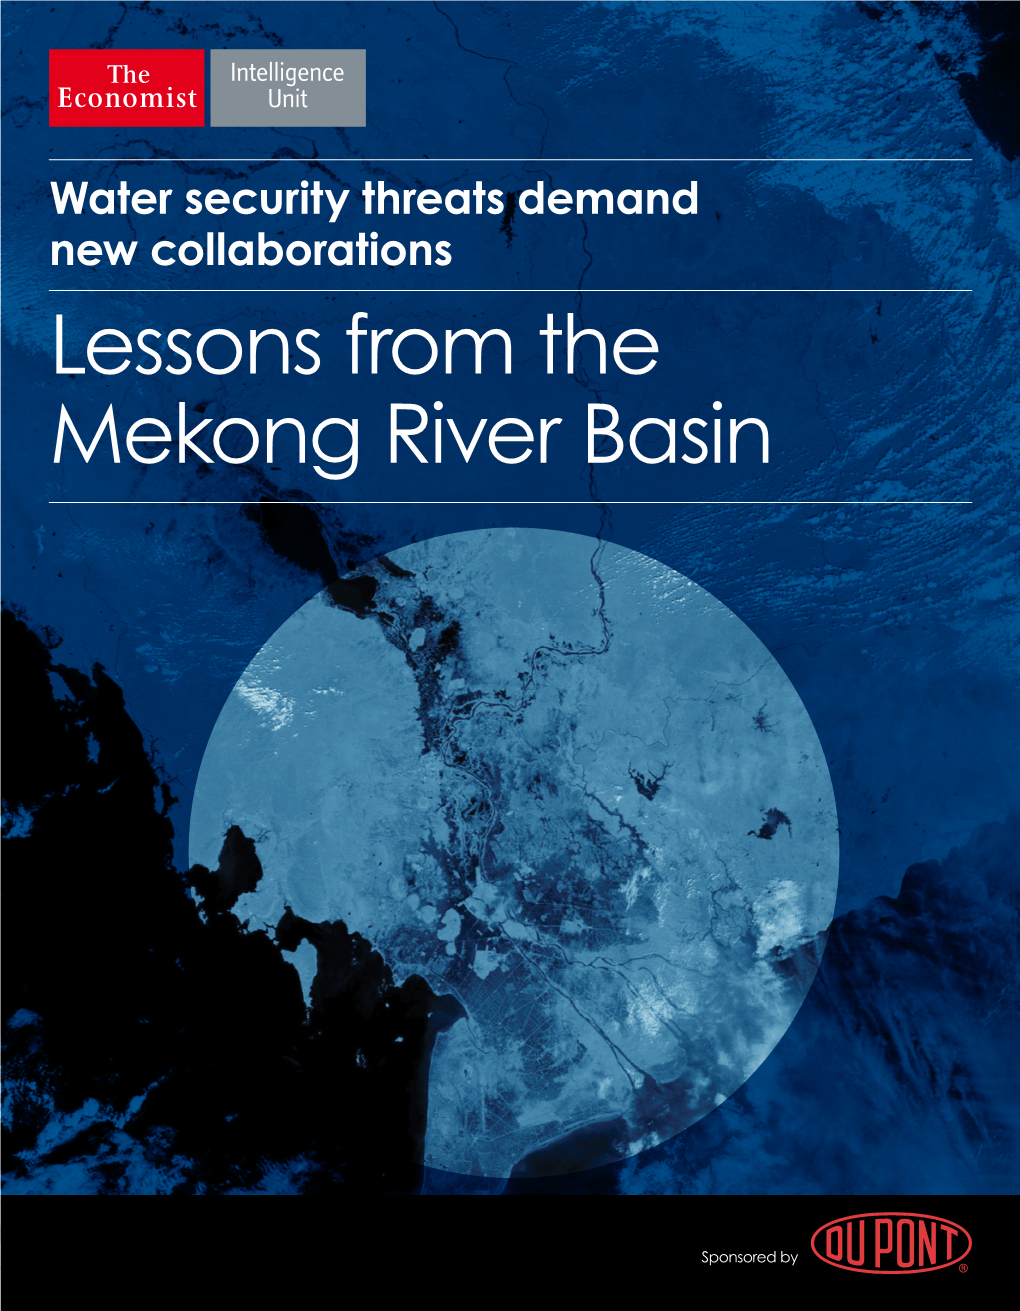 Lessons from the Mekong River Basin